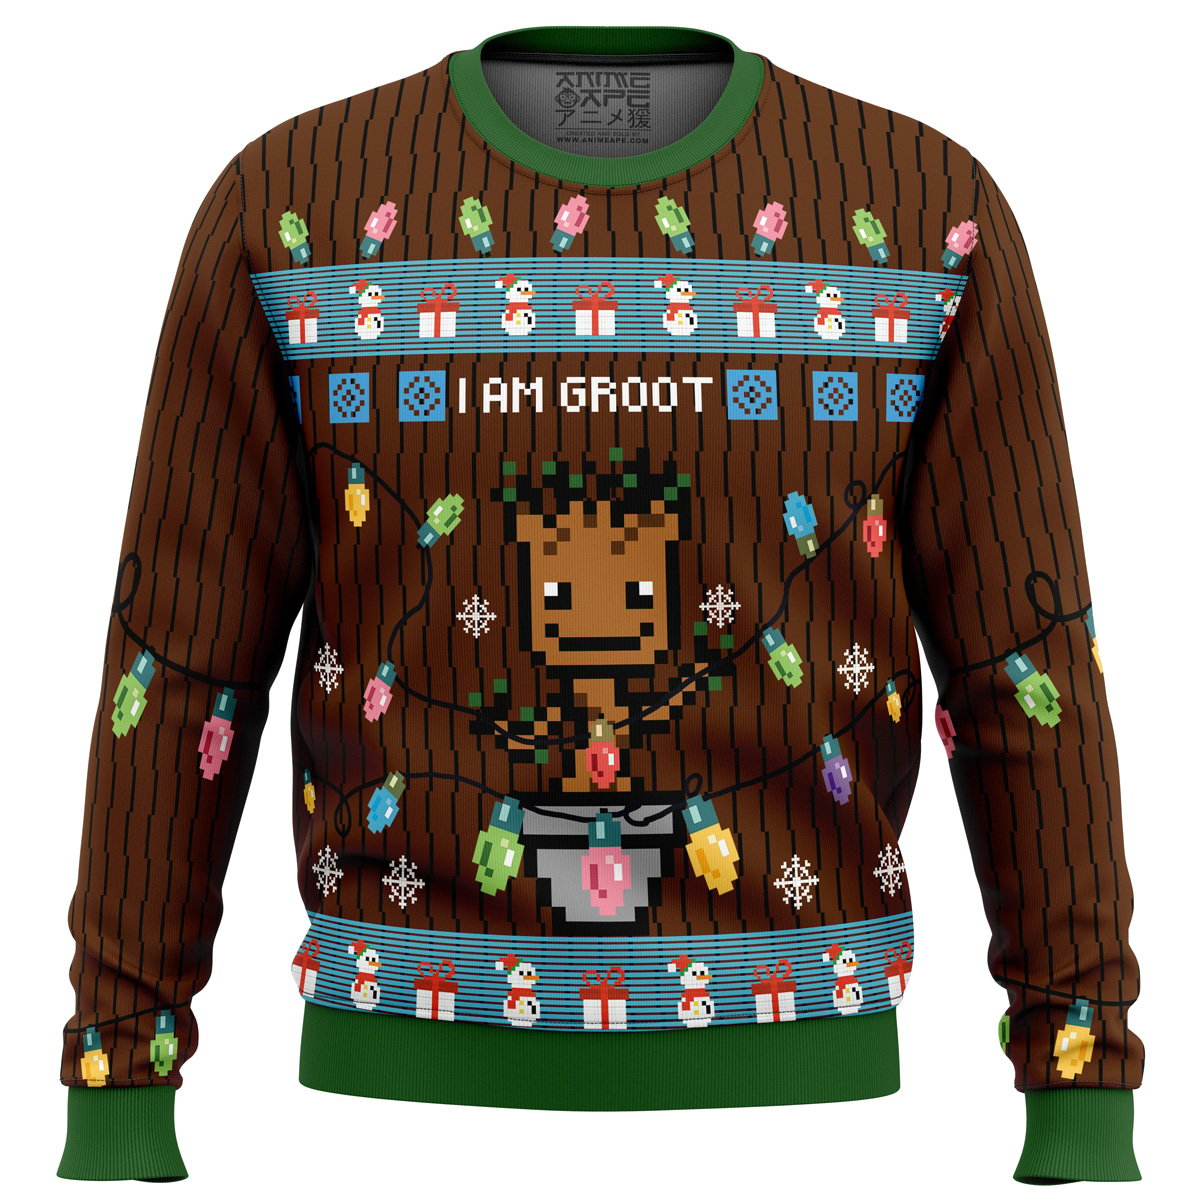 I am Groot Ugly Christmas Sweater